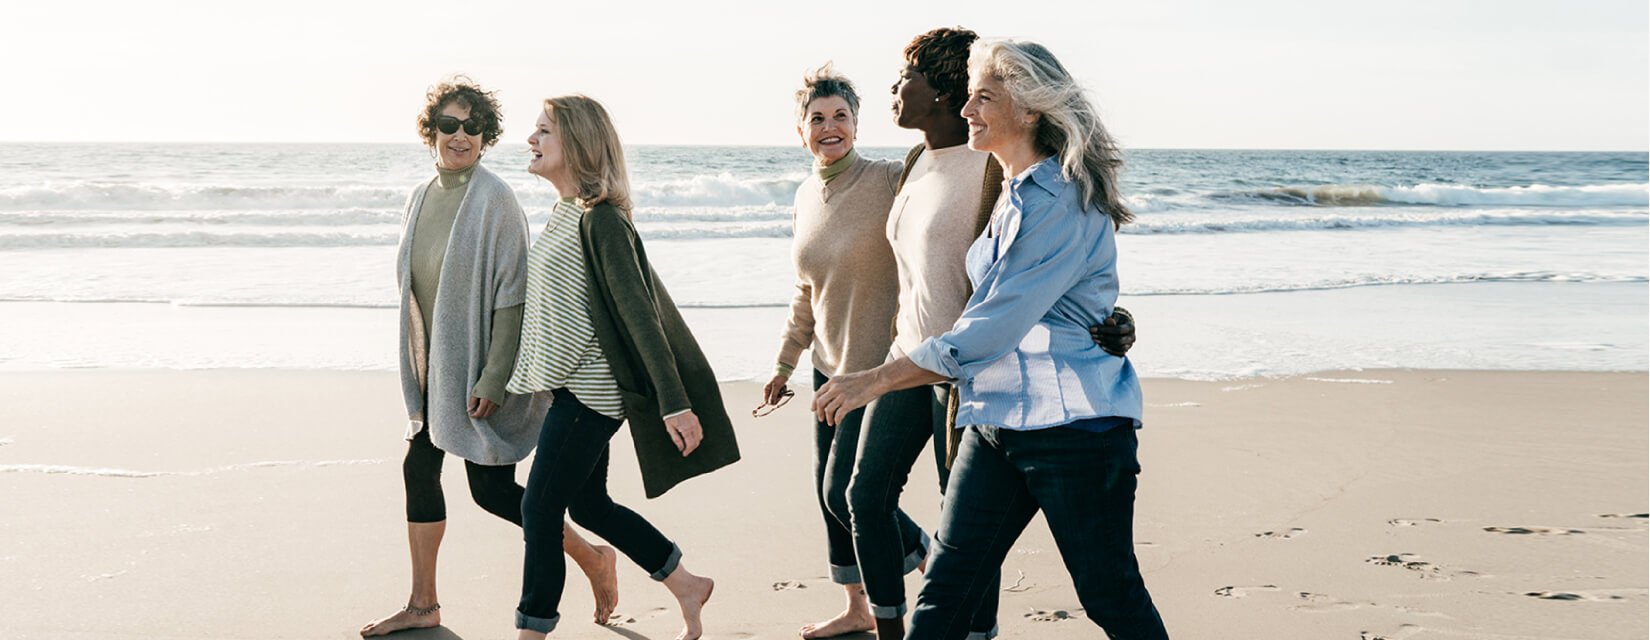 A group of five women in their 50s and 60s walking together on the beach